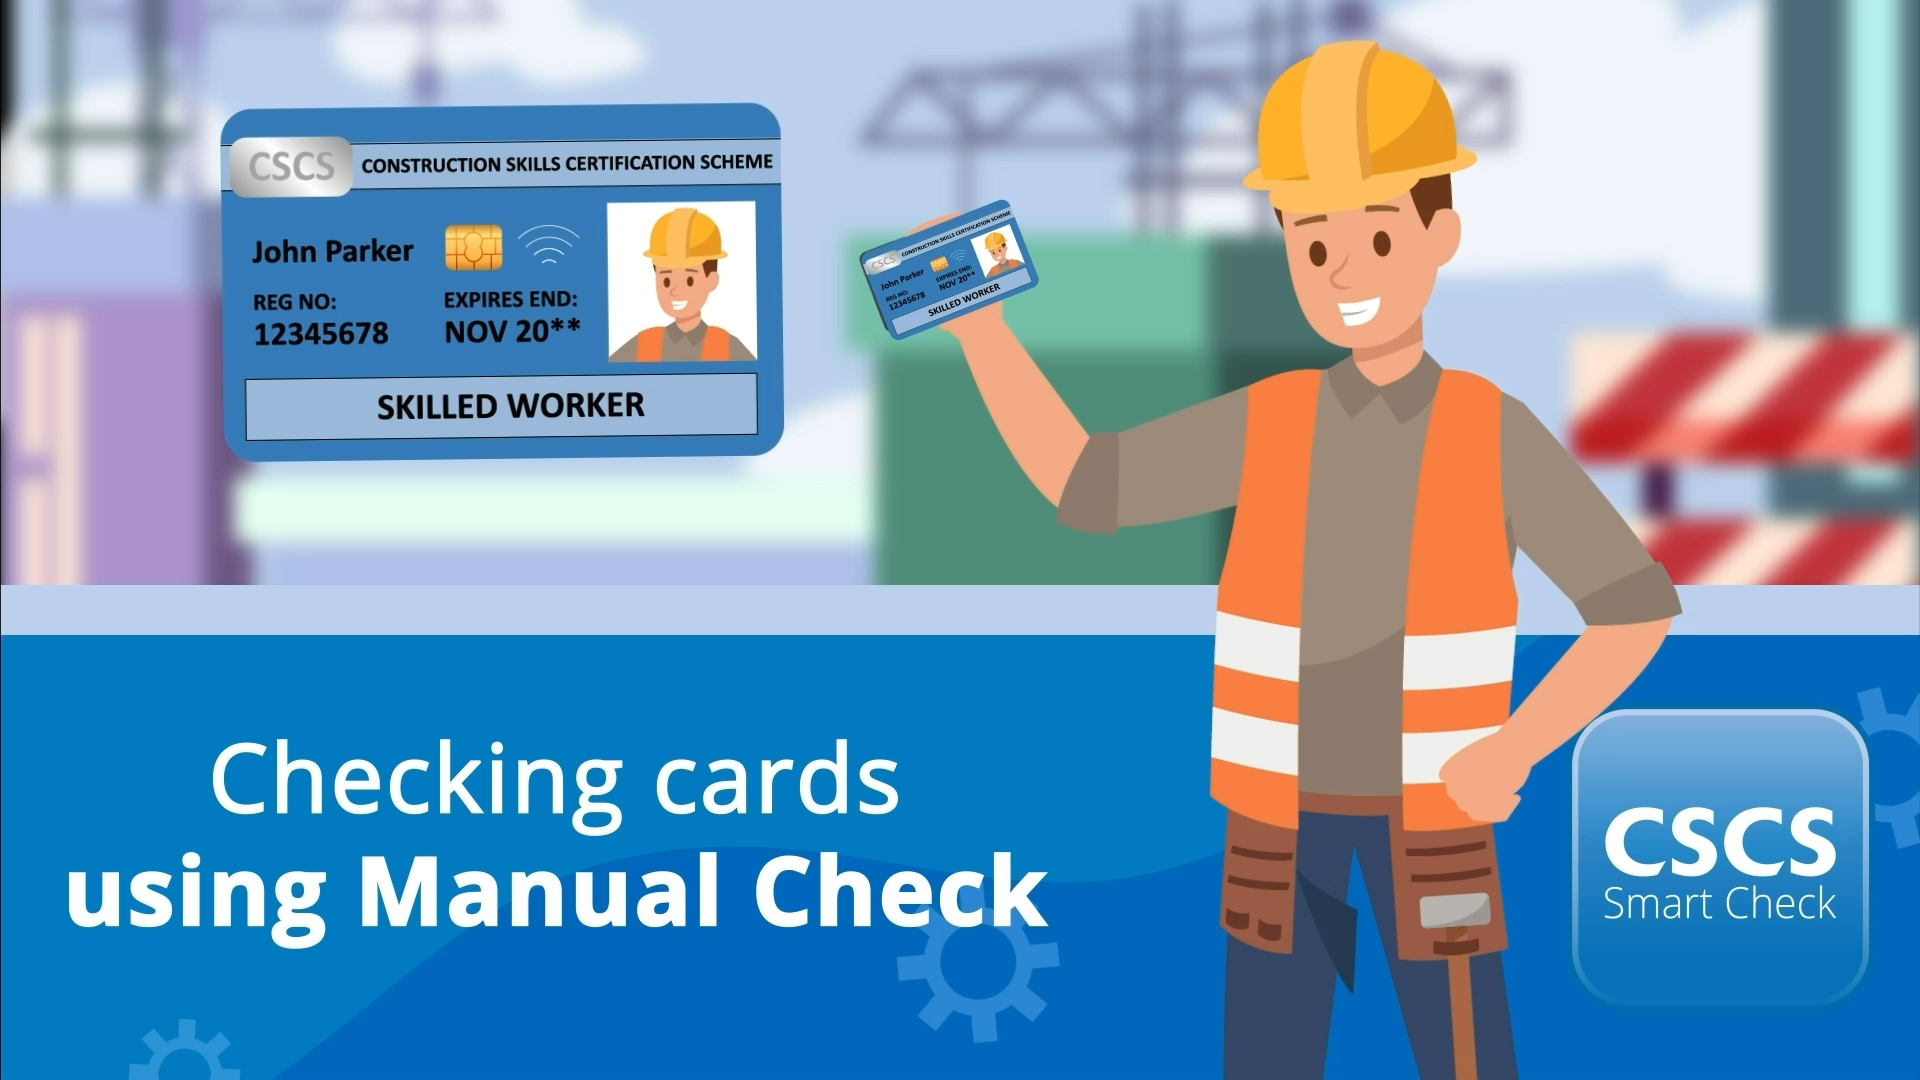 CSCS Smart Check | How to check a card using Manual Check